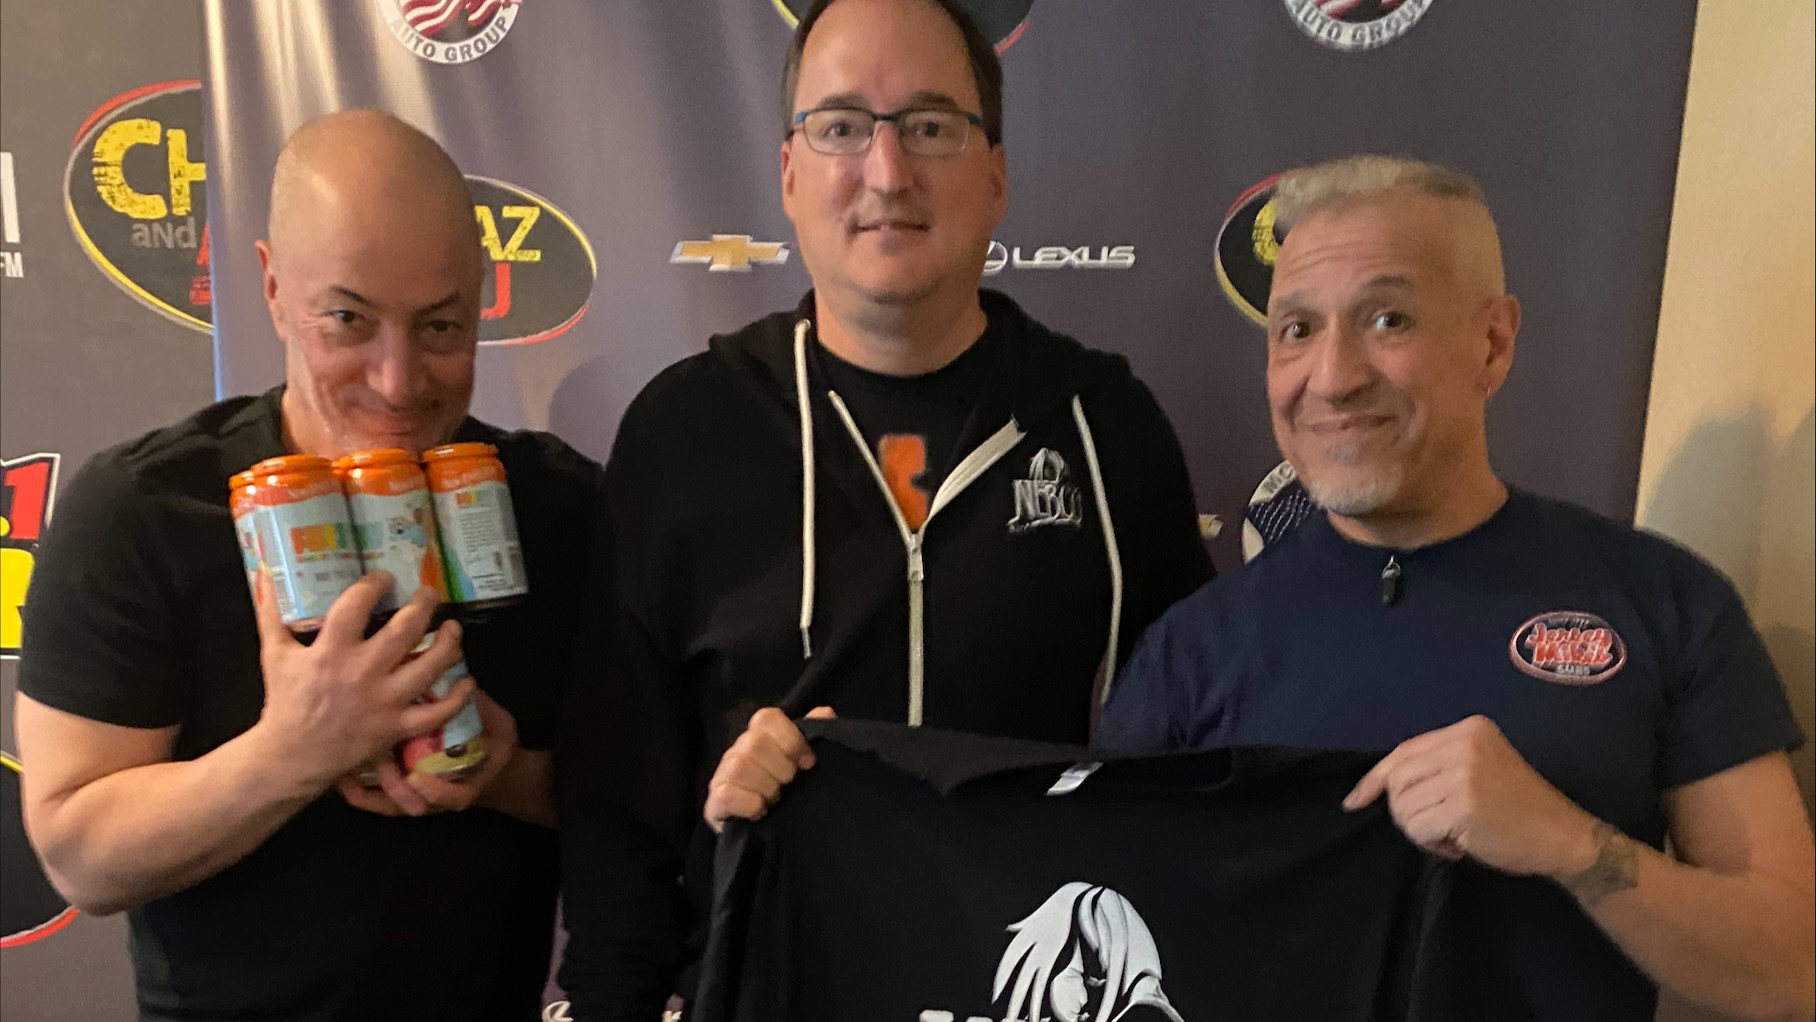 PODCAST – Tuesday, April 23: Cliff Jumping Fail; New England Brewing Co. In Studio; An Unsuccessful Threesome